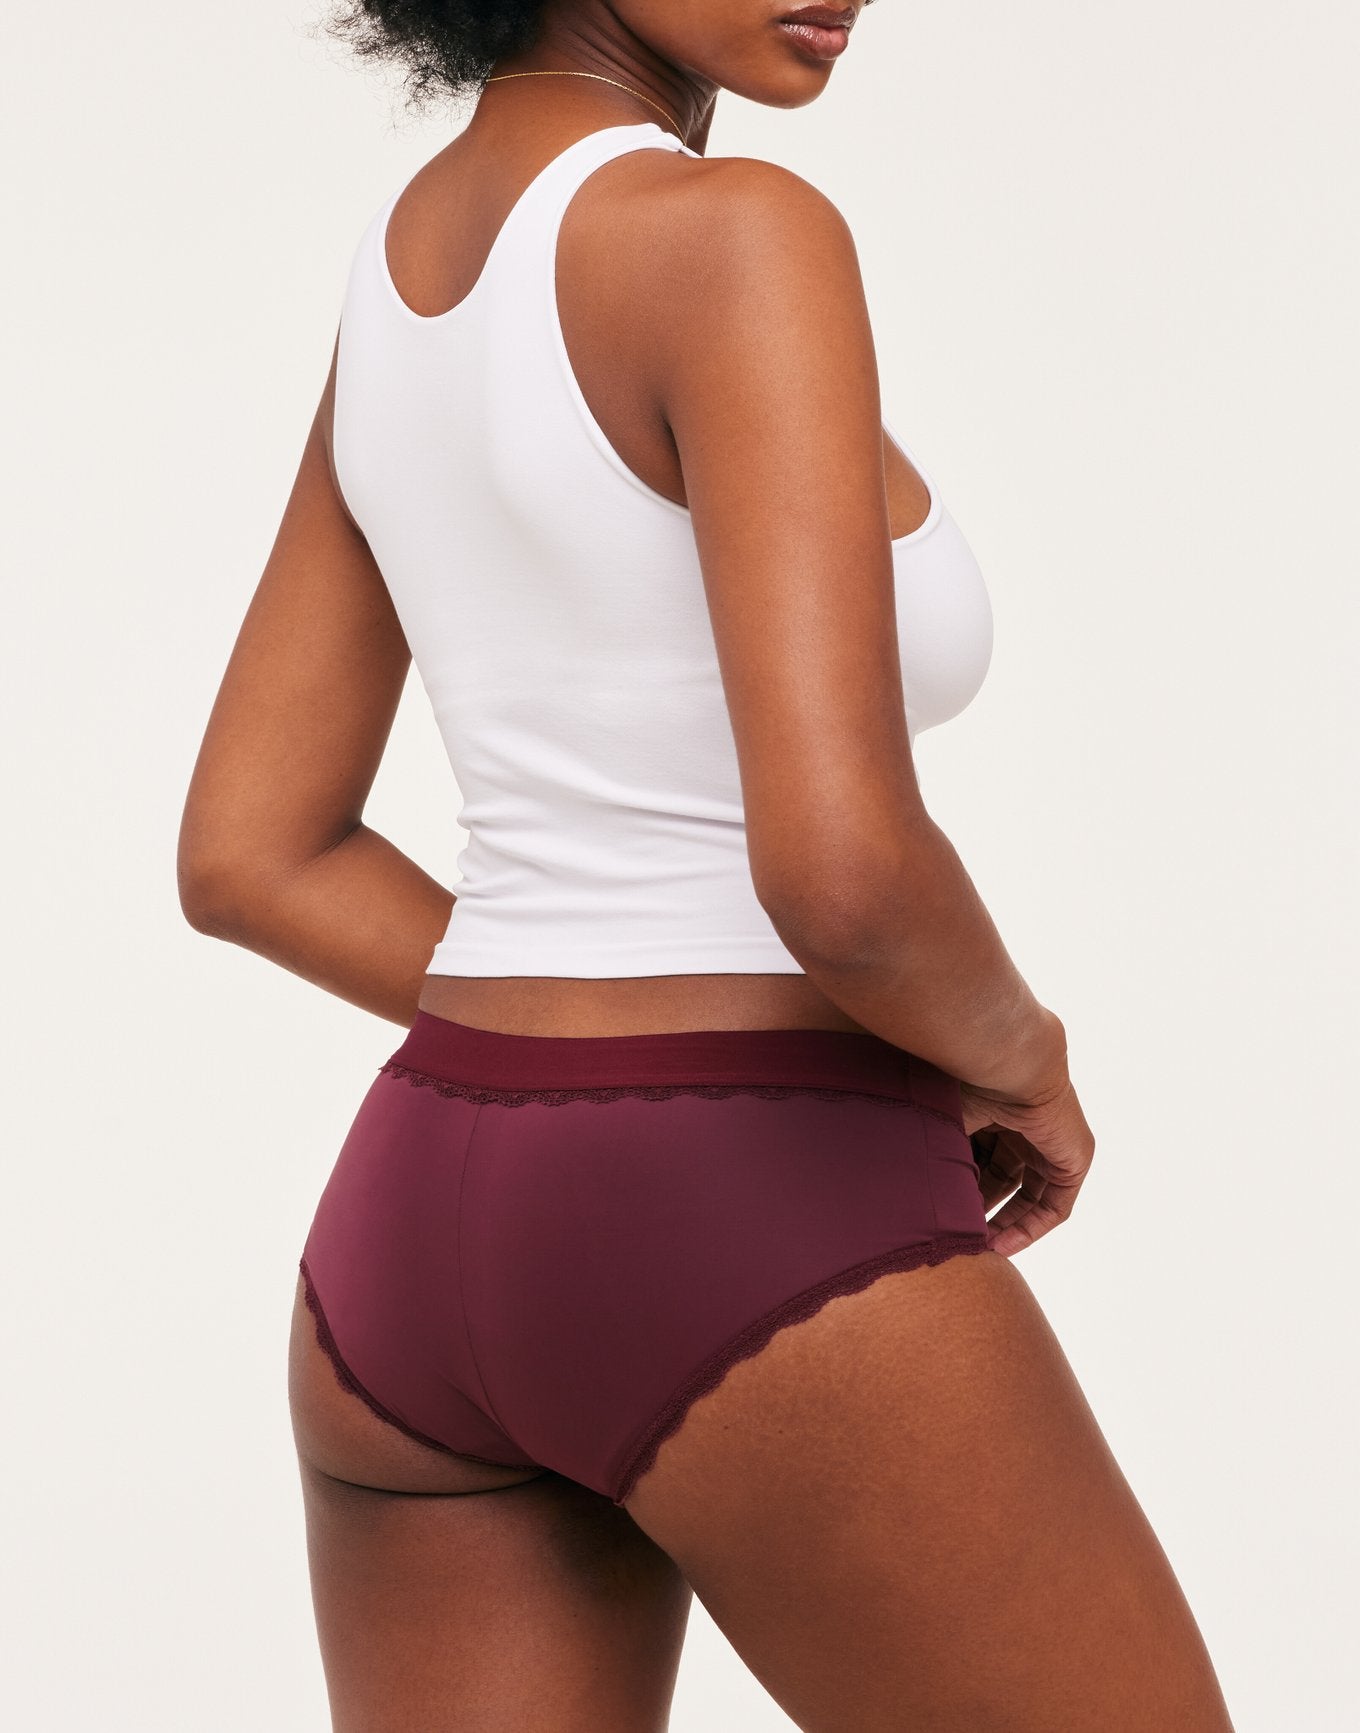 Joyja Olivia period-proof panty in color Windsor Wine and shape hipster